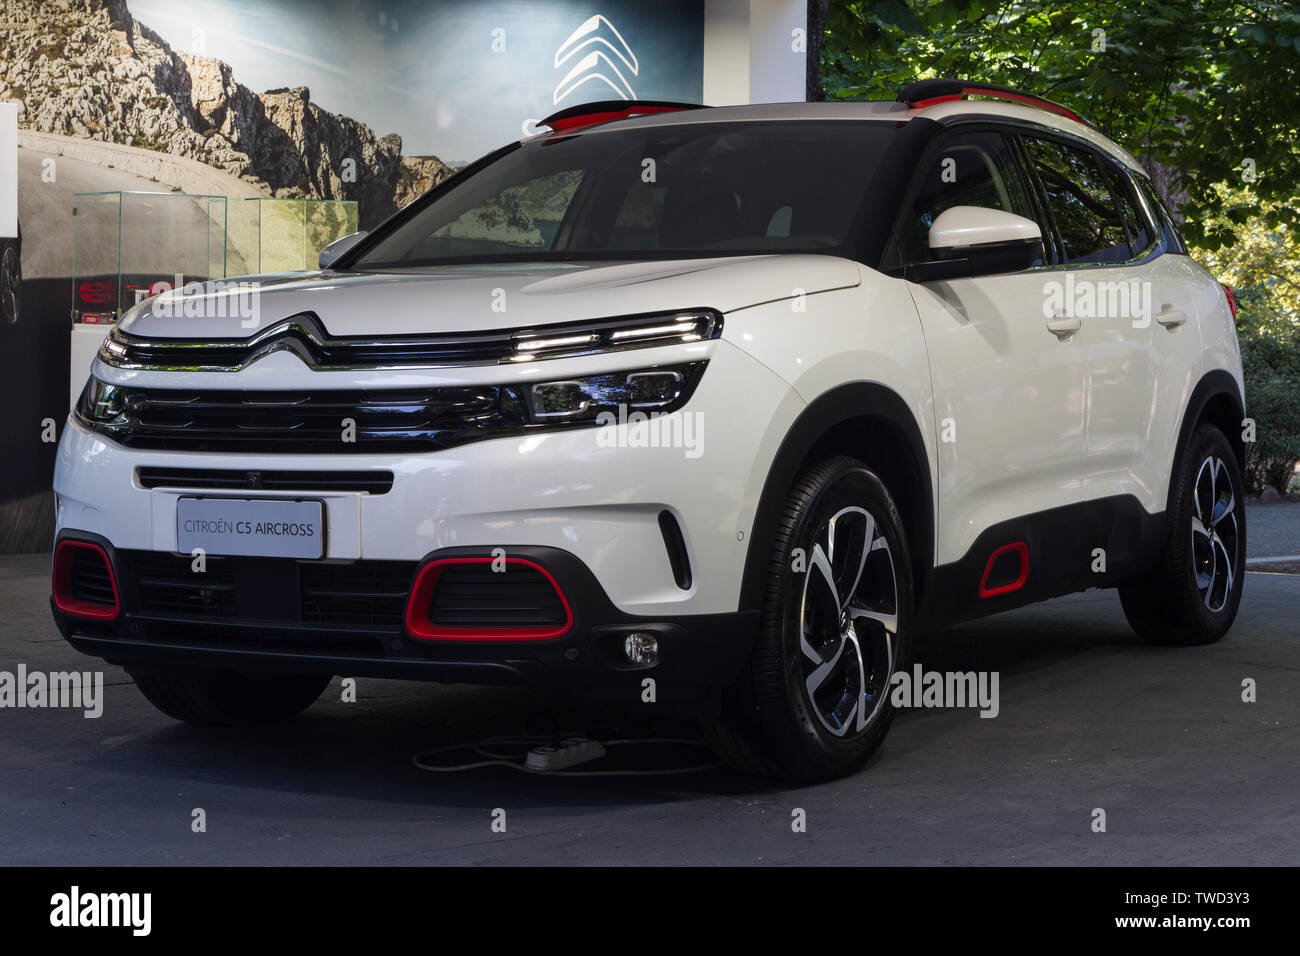 A Citroën C5 Aircross. 2019 edition of Parco Valentino car show hosts cars by many brands and car designers in Valentino Park in Torino, Italy. Stock Photo